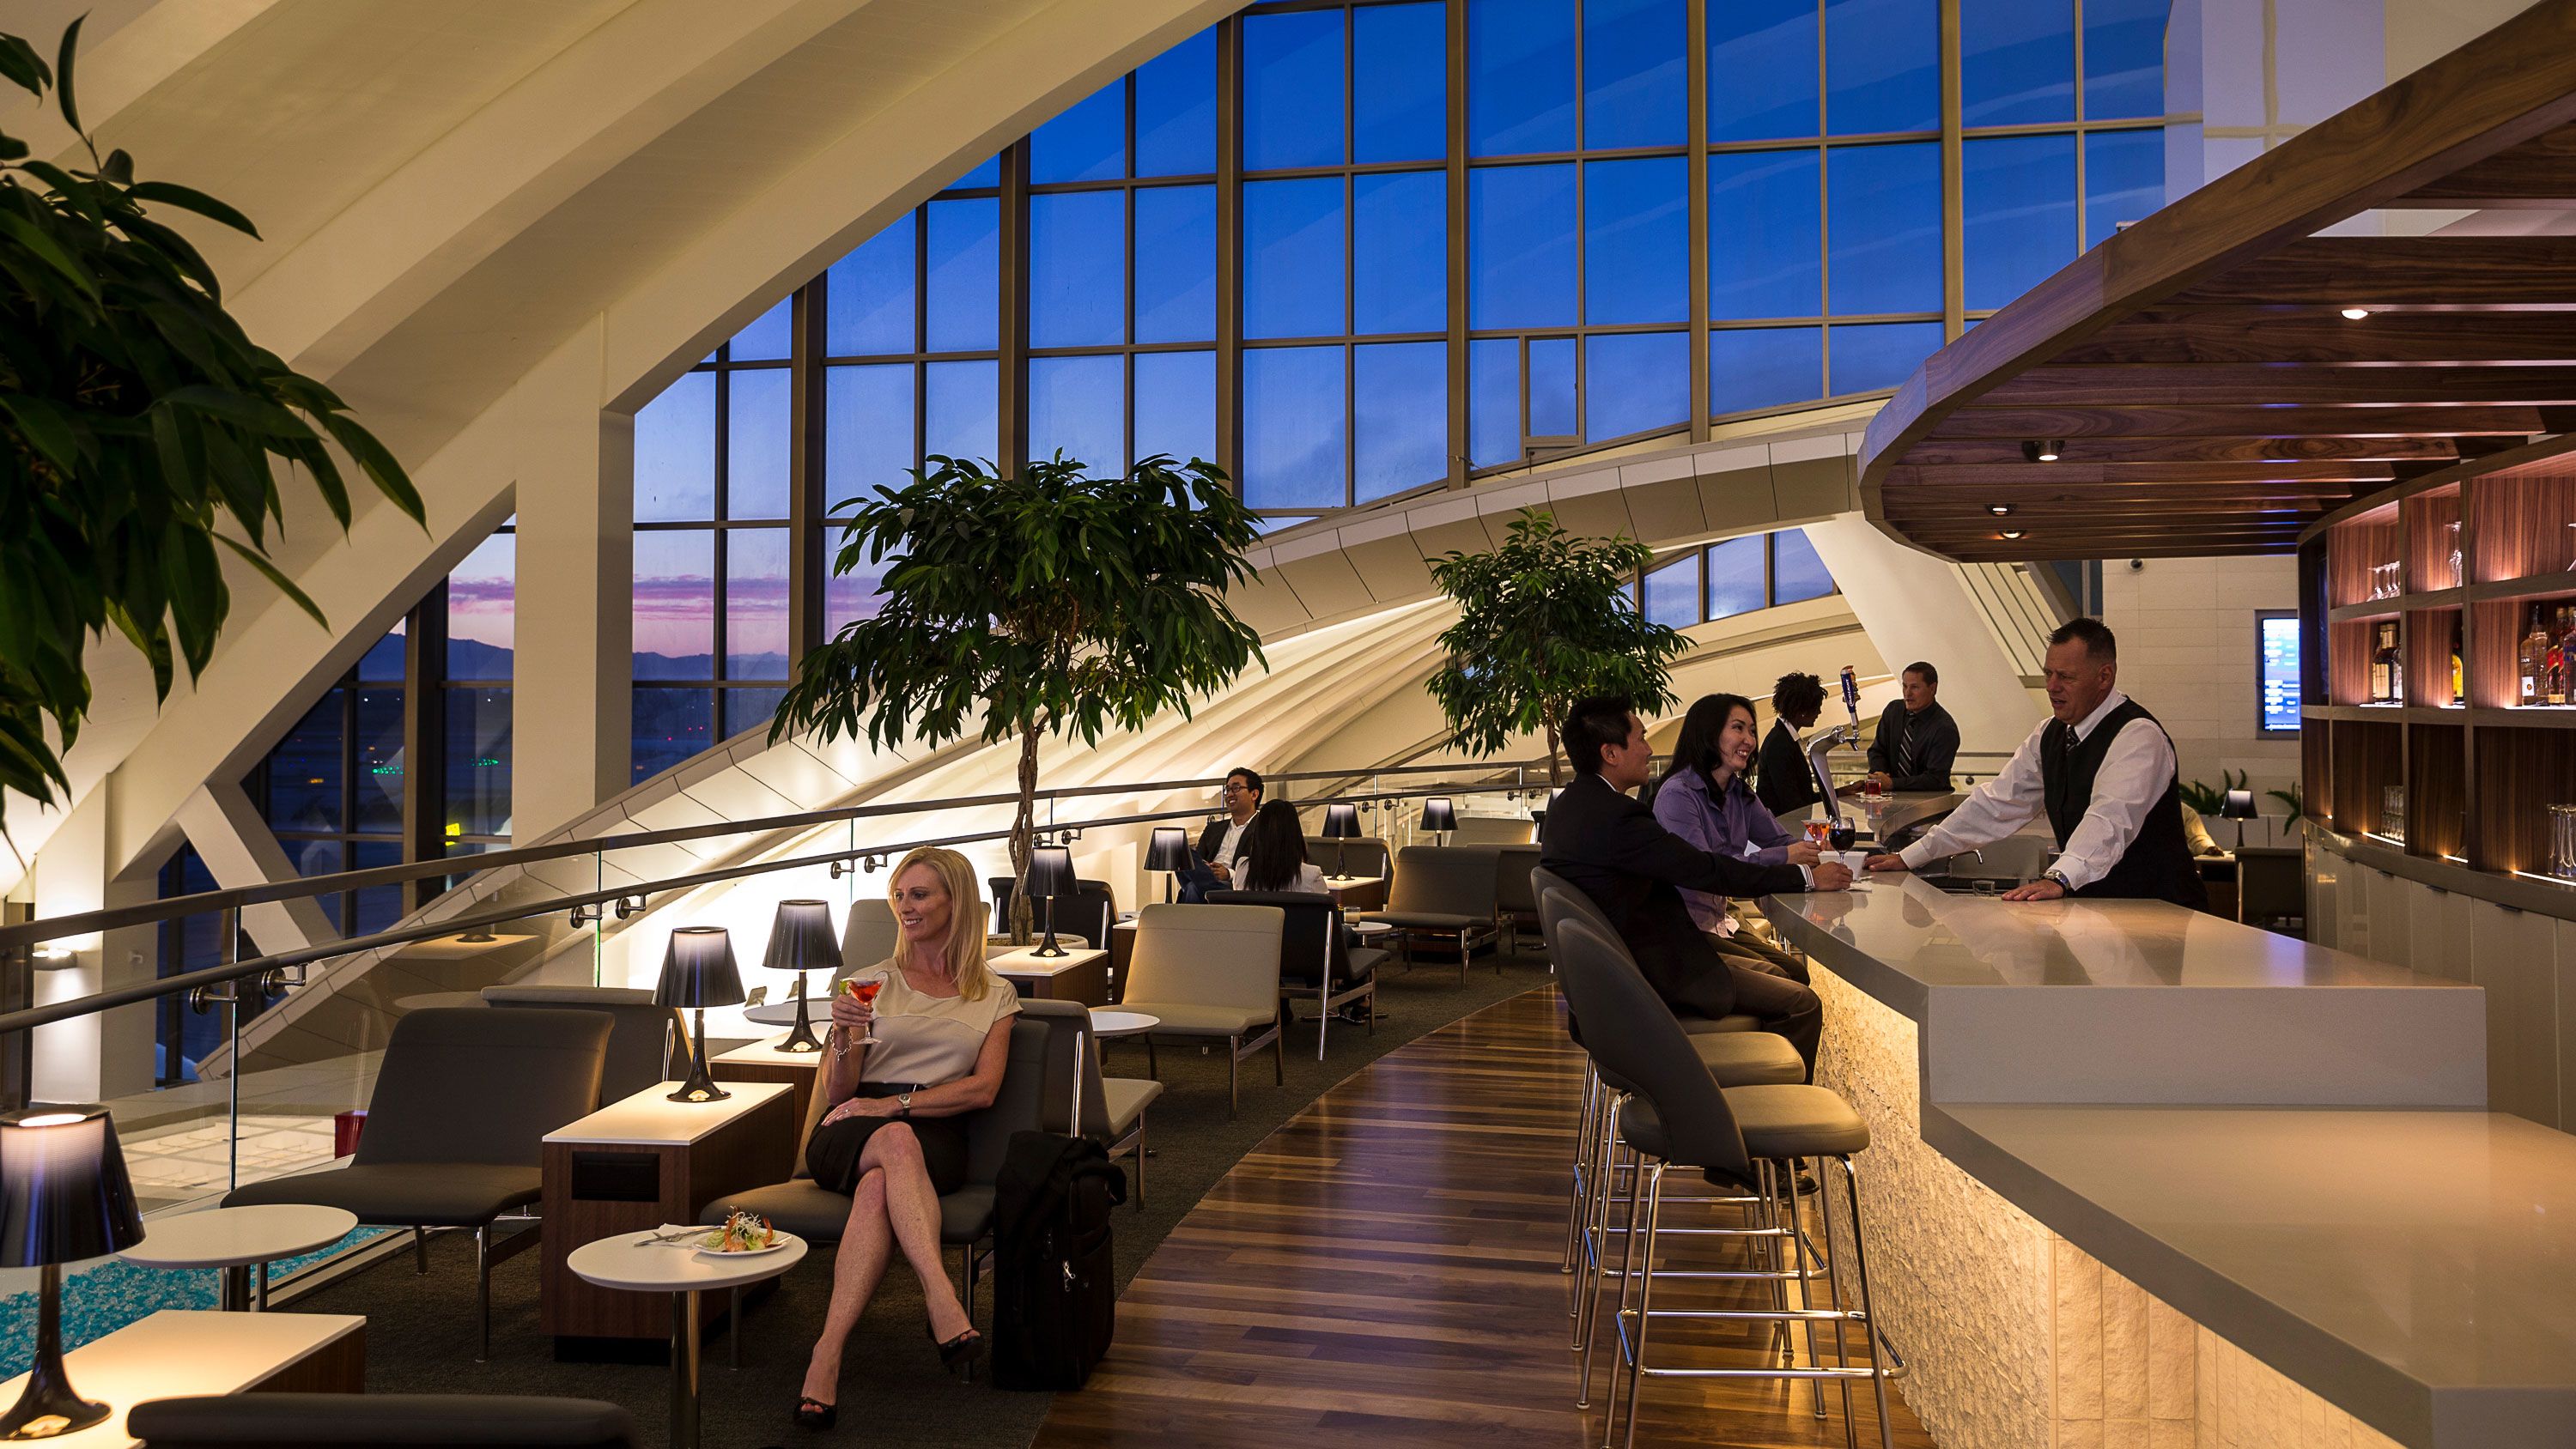 Louis Vuitton and chef Yannick Alléno open lounge at Hamad International  Airport